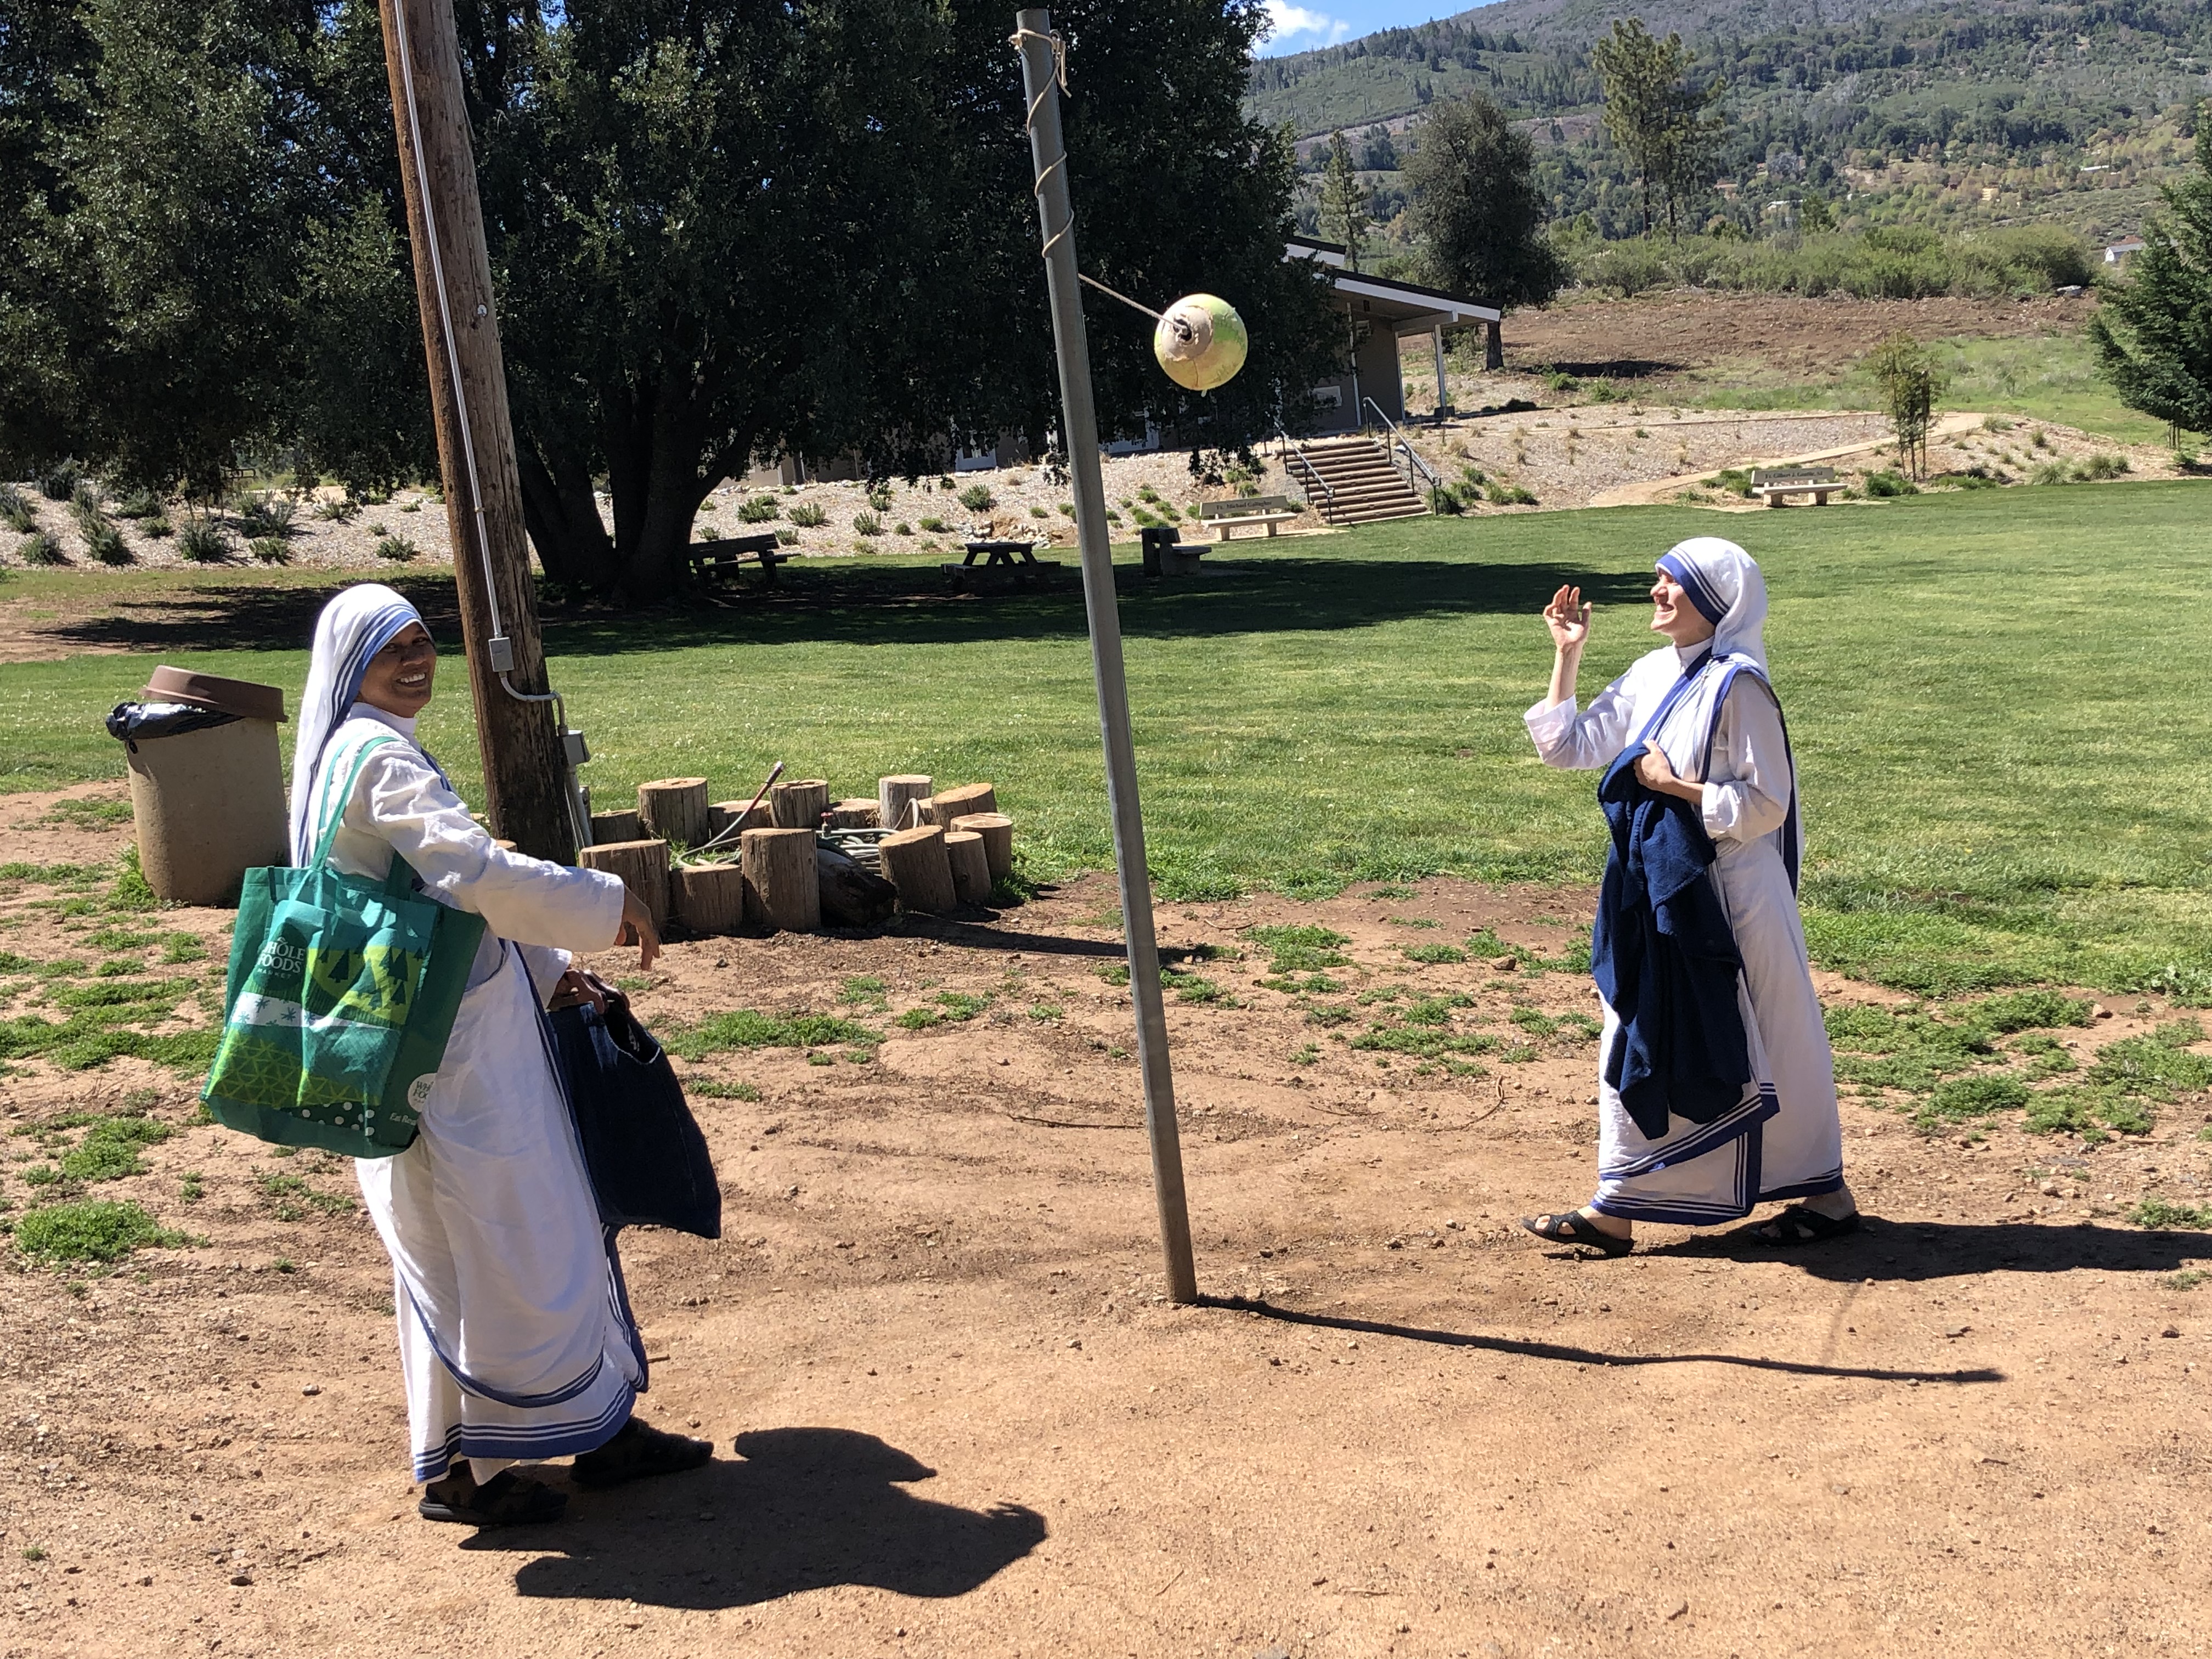 Two nuns in habits playing tetherball near meadow